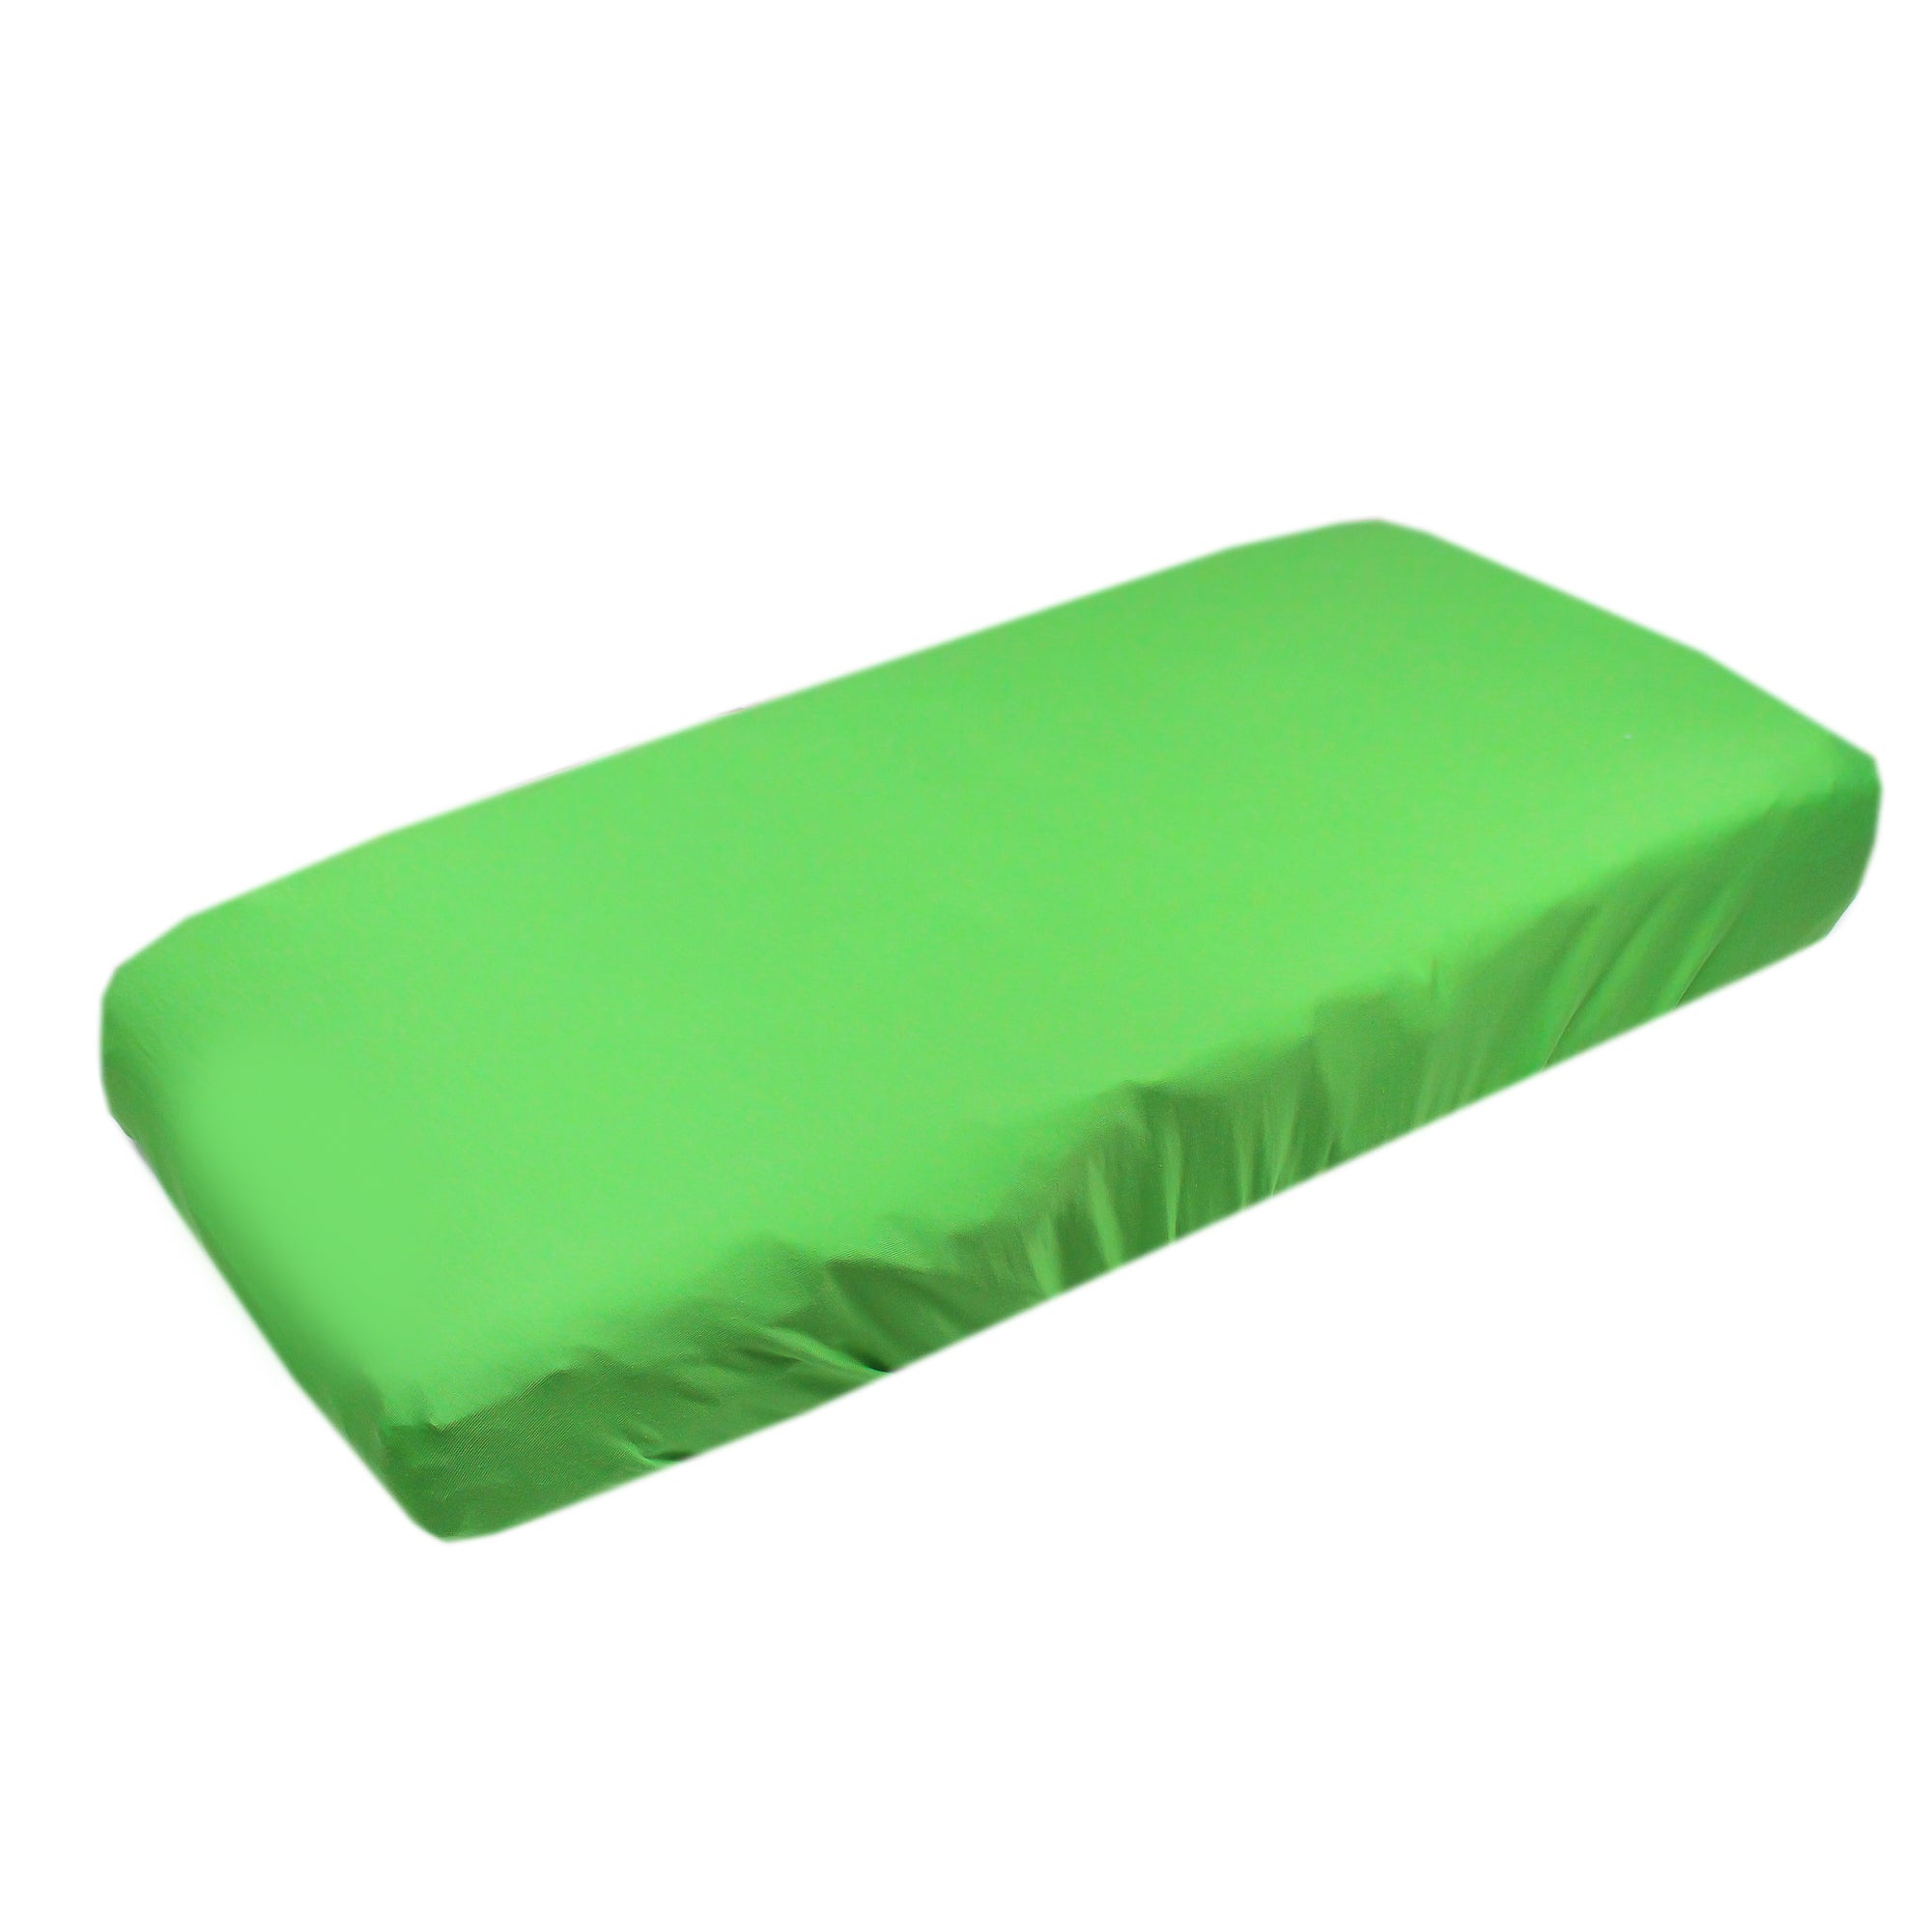 Premium Knit Diaper Changing Pad Cover - Lime